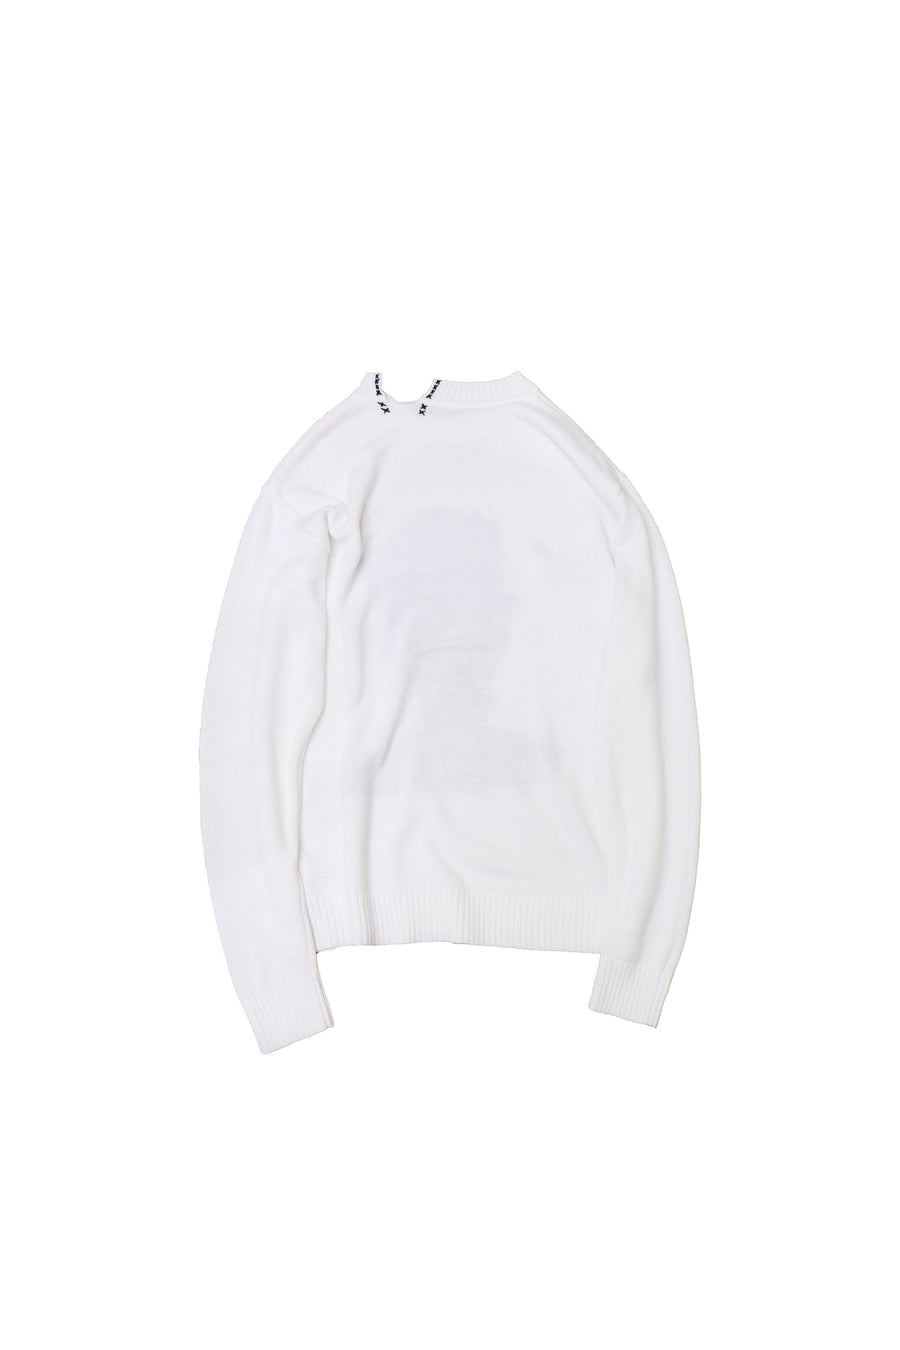 kudos  portrait of a man pullover(WHITE)